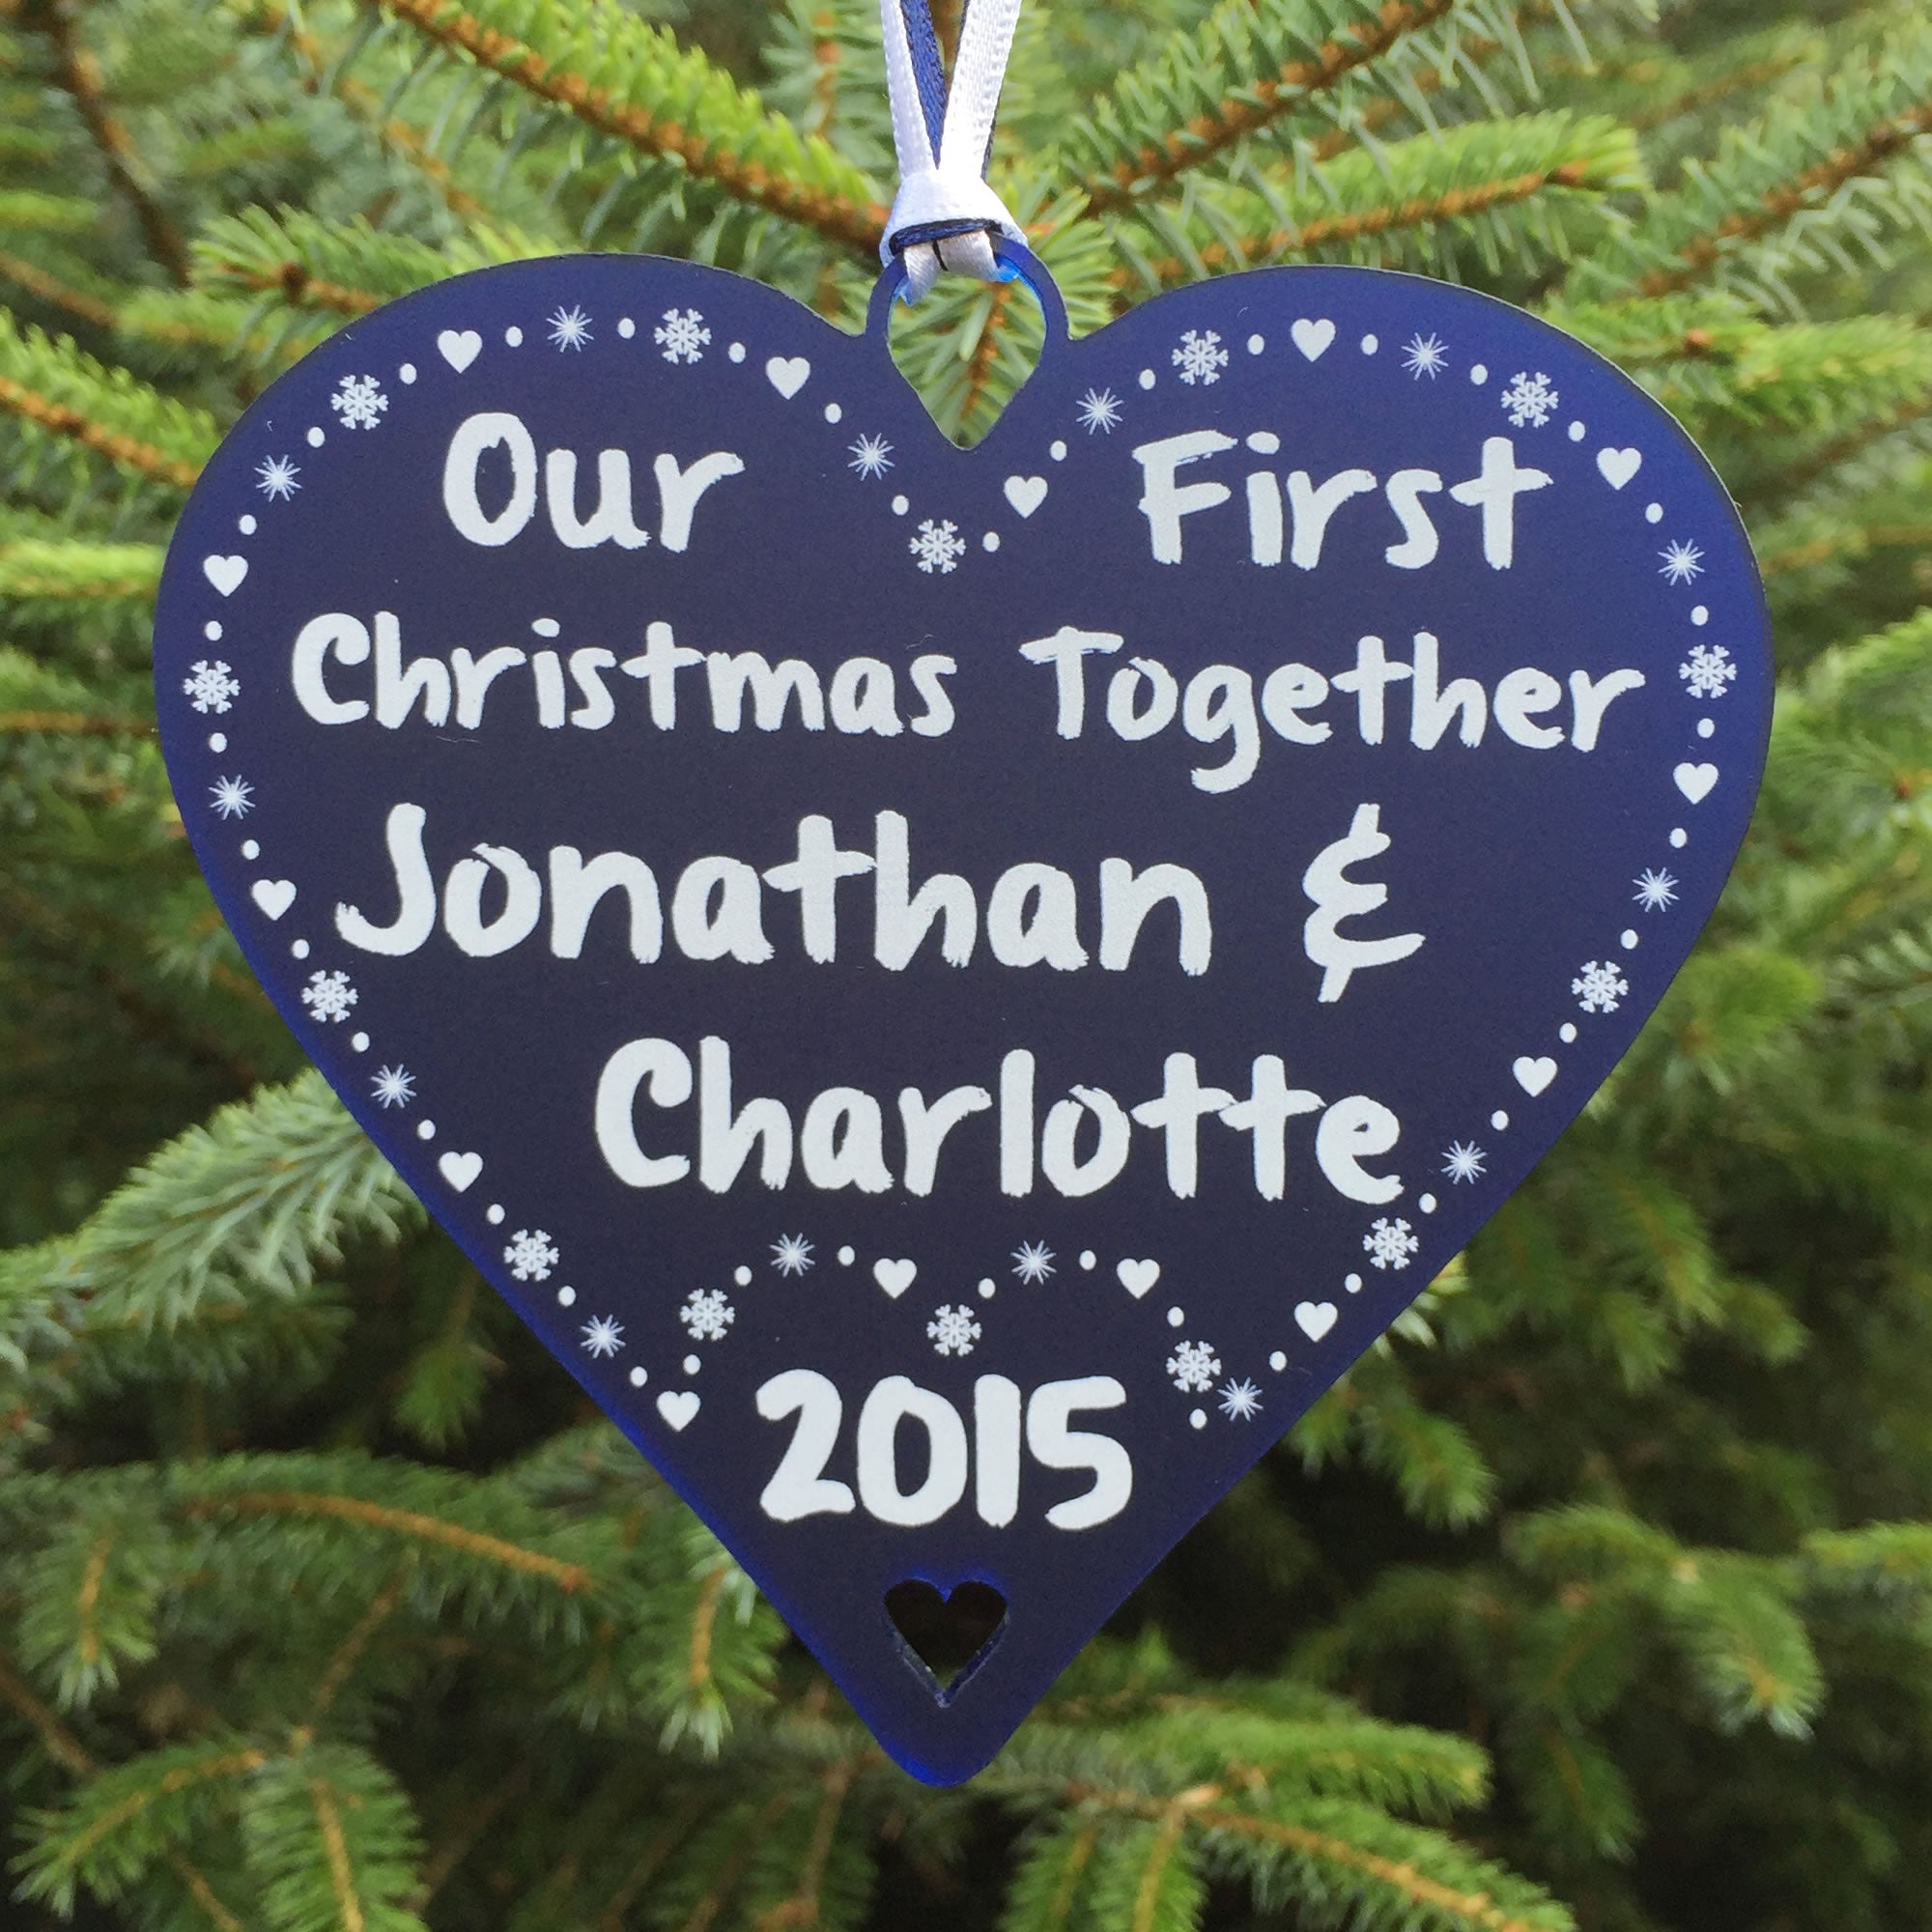 First Christmas Together in 2023 as Boyfriend Girlfriend Personalised Bauble - 10cm Heart